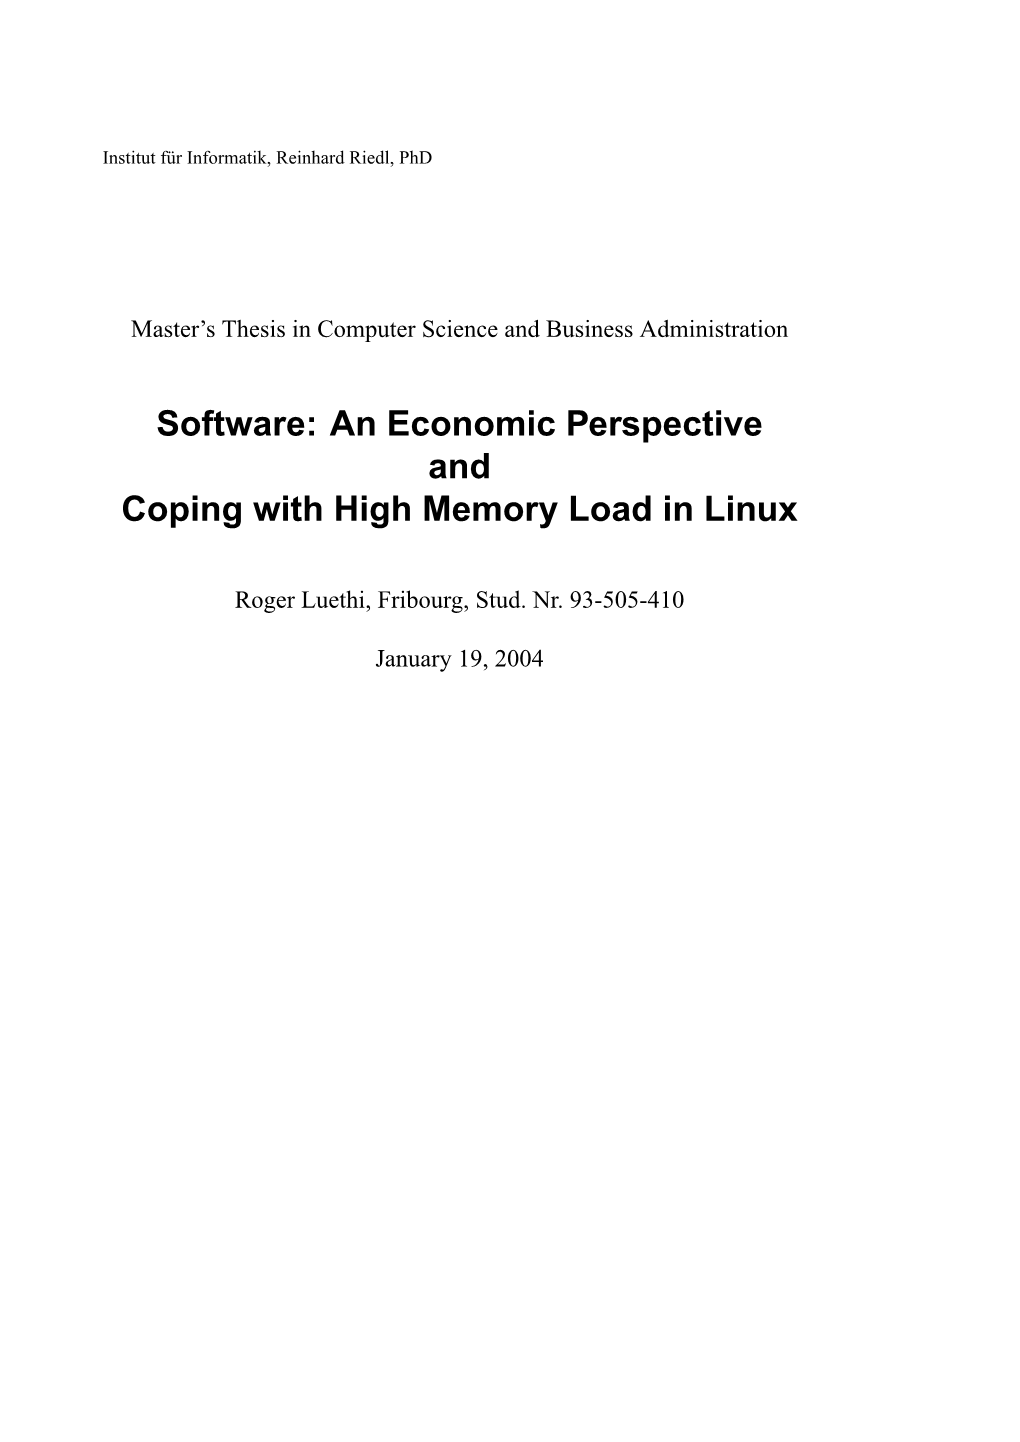 An Economic Perspective and Coping with High Memory Load in Linux